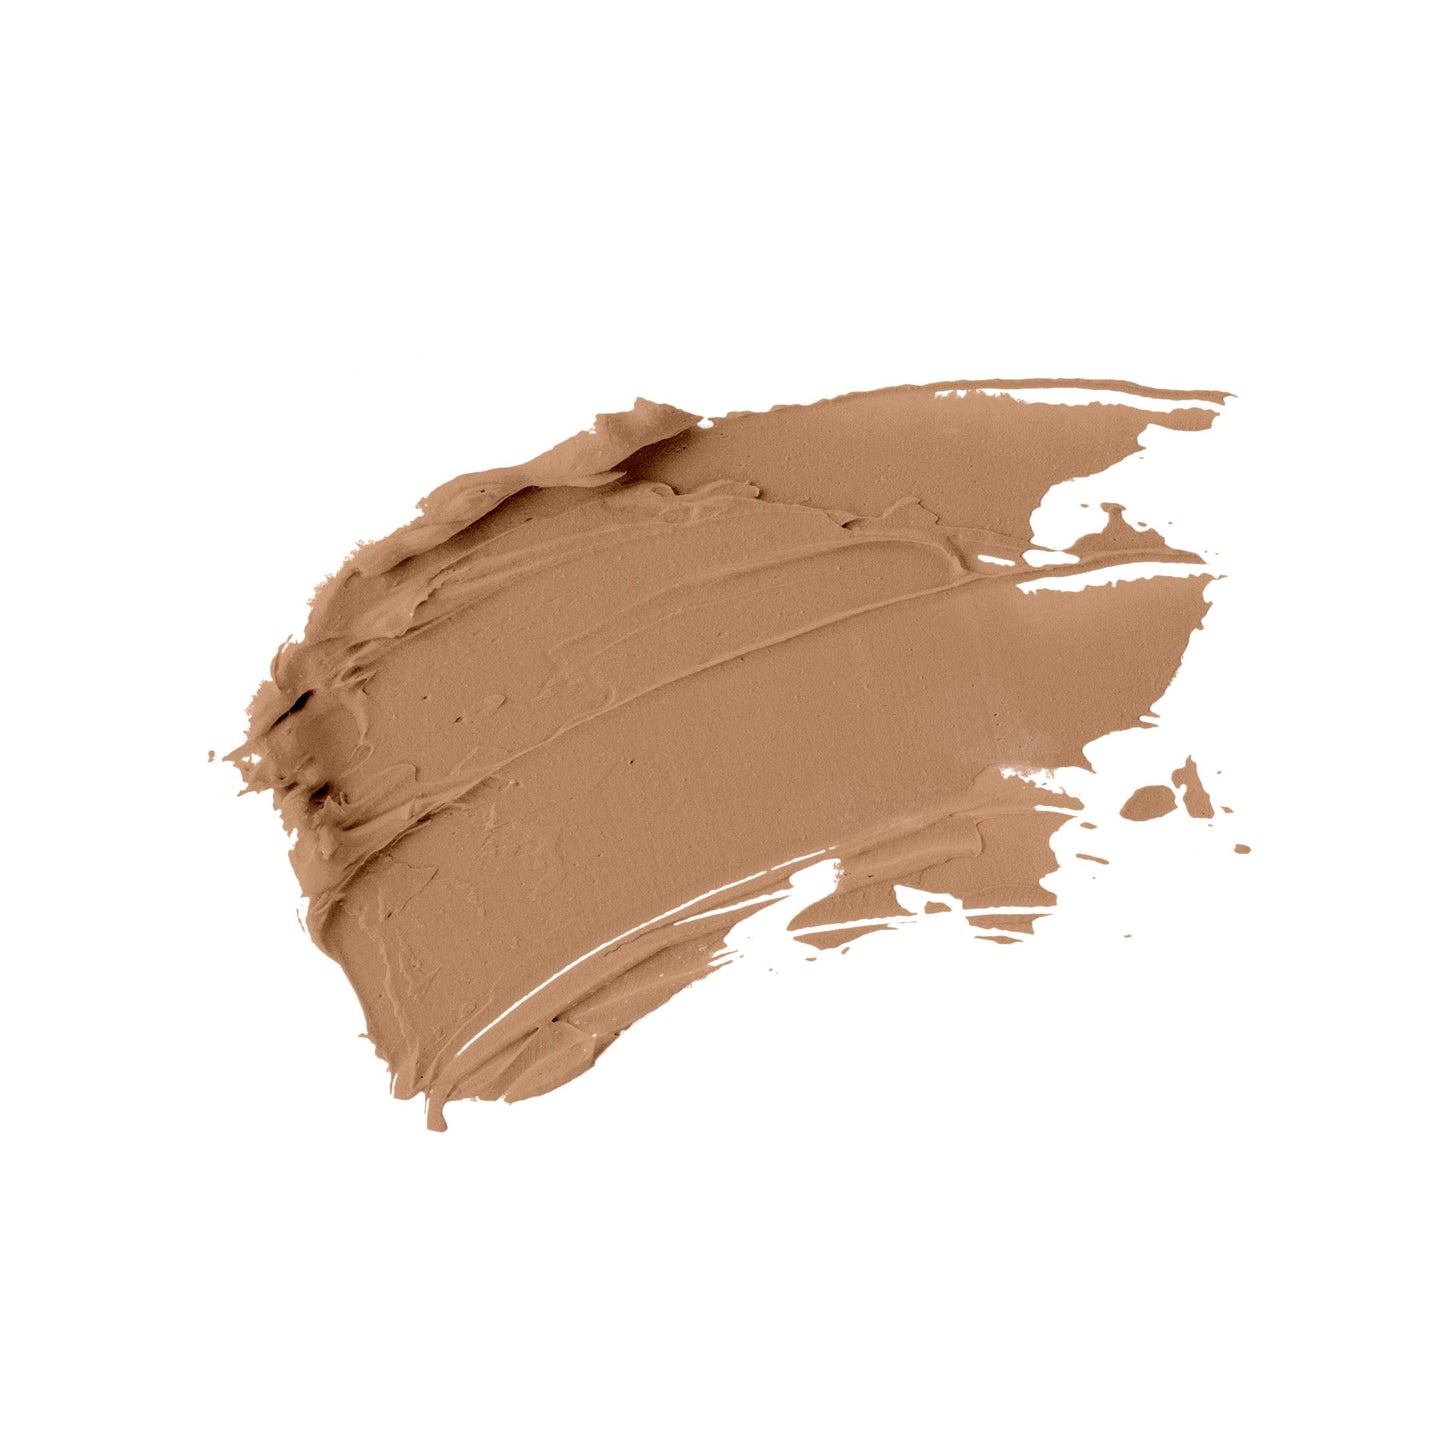 Swatch of medium light porcelain tone of an oil free natural non-toxic liquid foundation